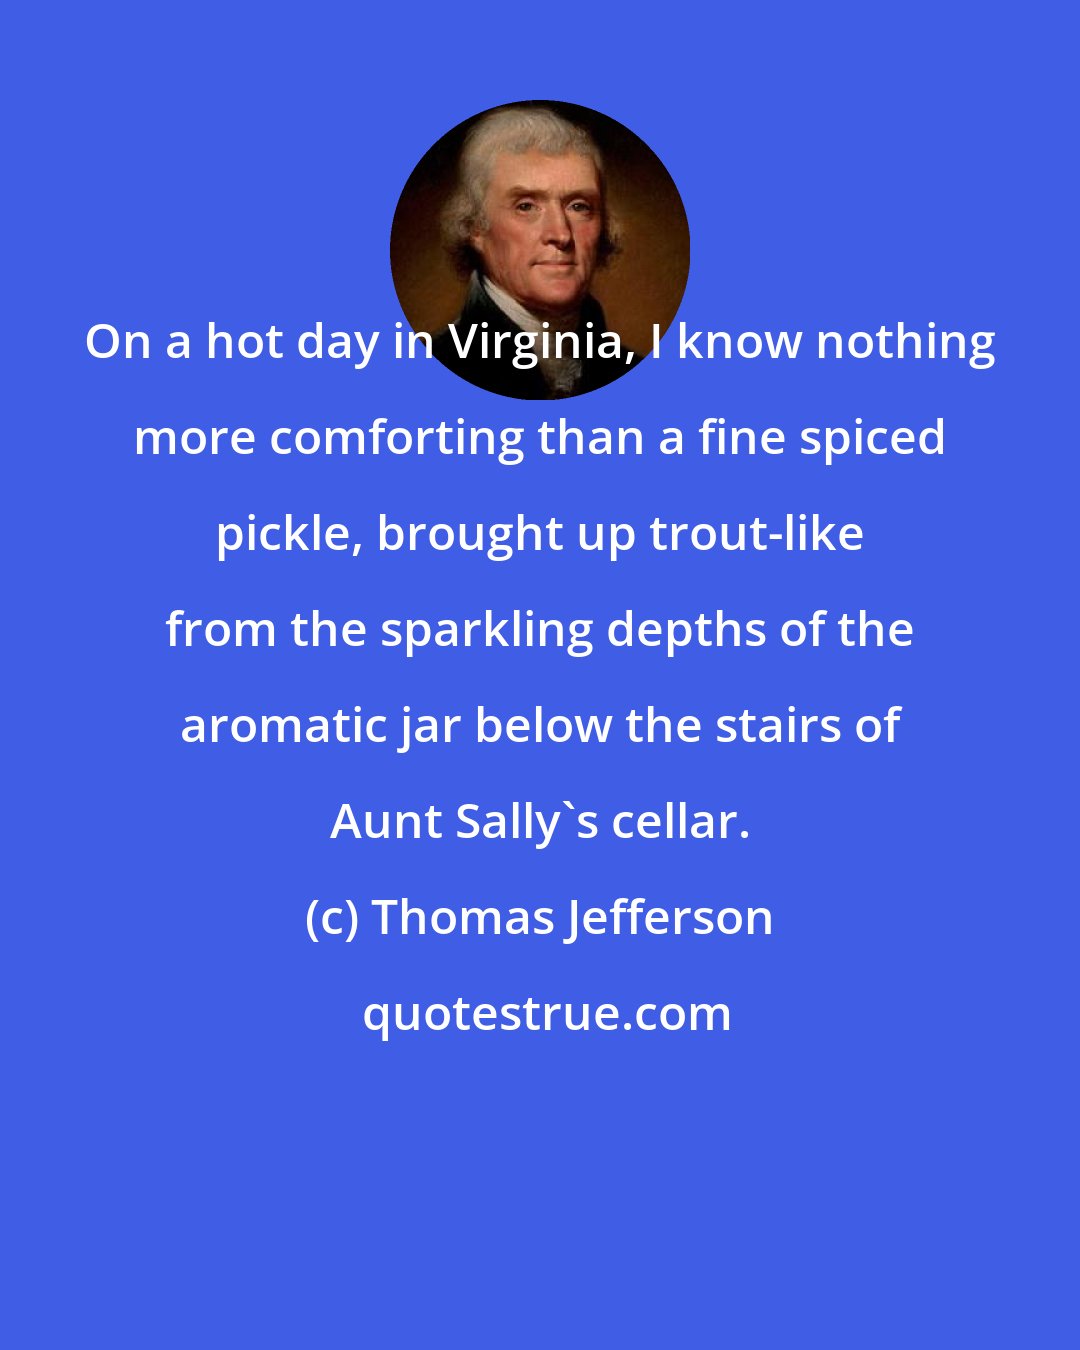 Thomas Jefferson: On a hot day in Virginia, I know nothing more comforting than a fine spiced pickle, brought up trout-like from the sparkling depths of the aromatic jar below the stairs of Aunt Sally's cellar.